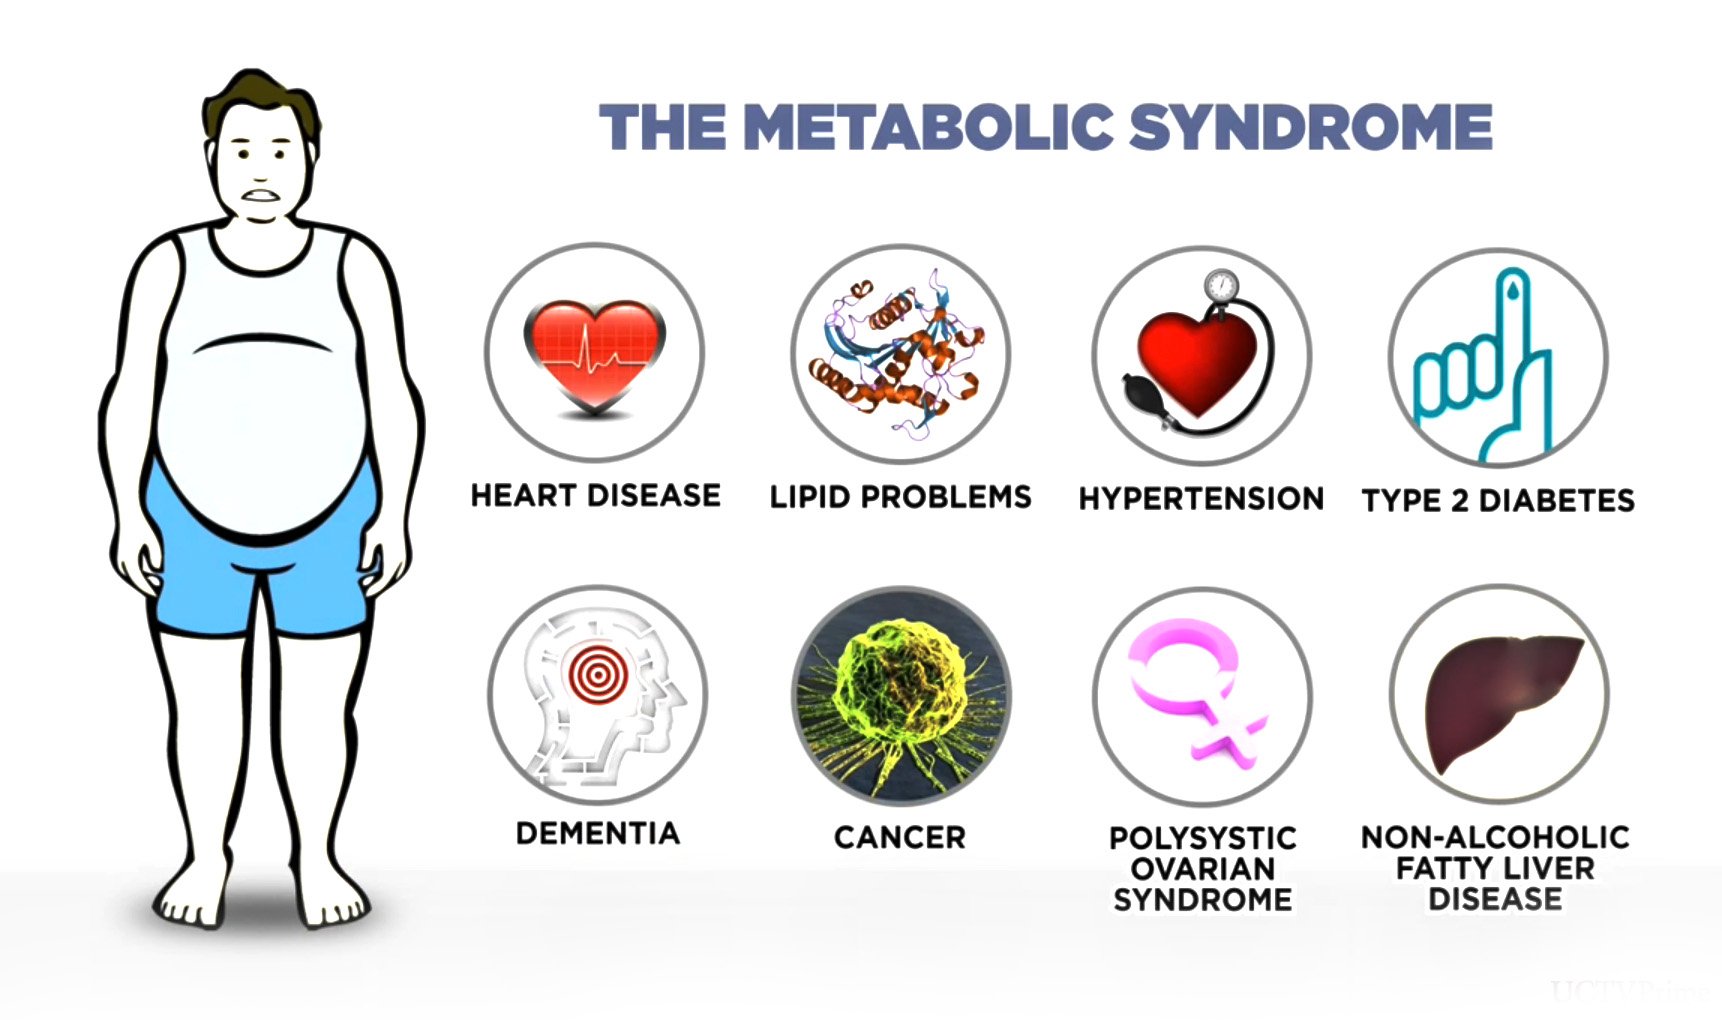 MORE ABOUT METABOLIC SYNDROME